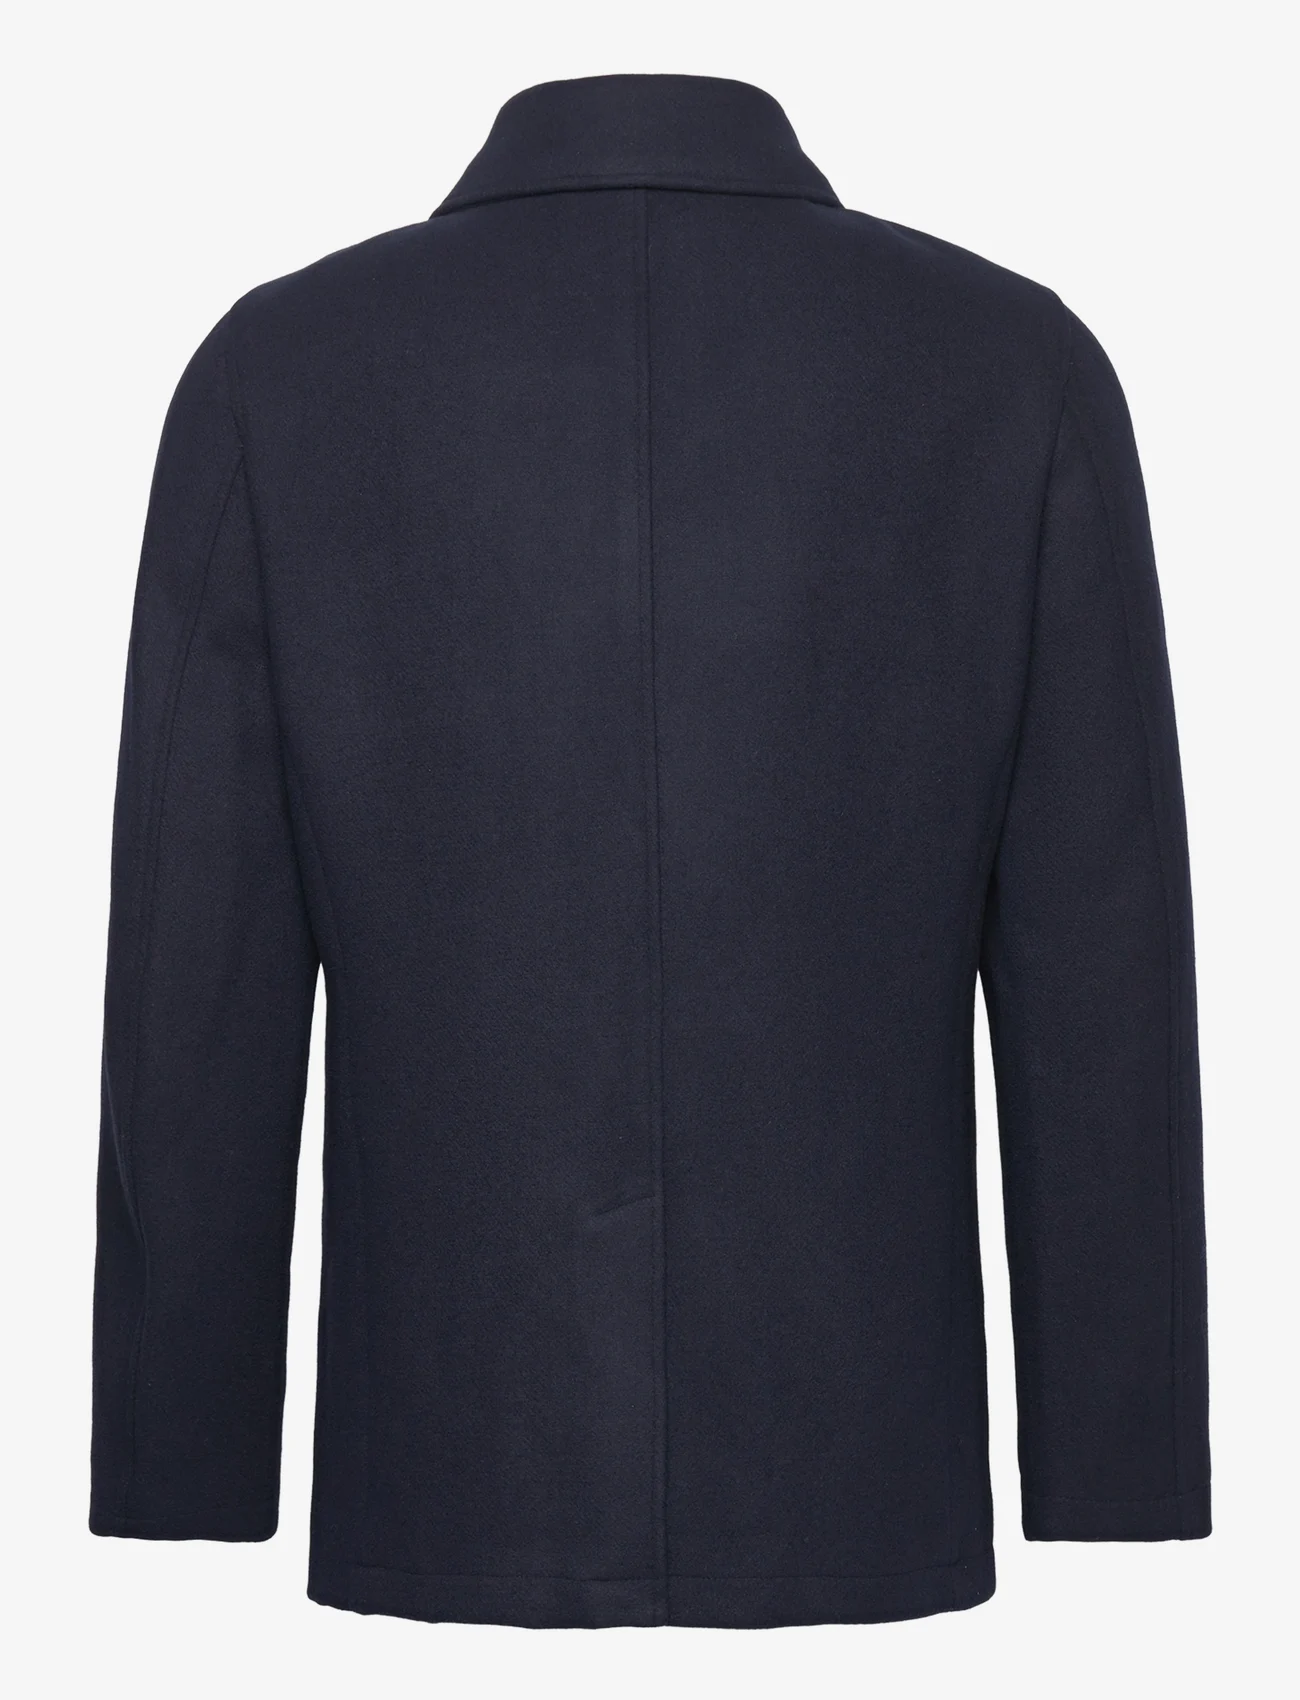 French Connection - DB PEACOAT 3 W mr - ulljackor - navy - 1